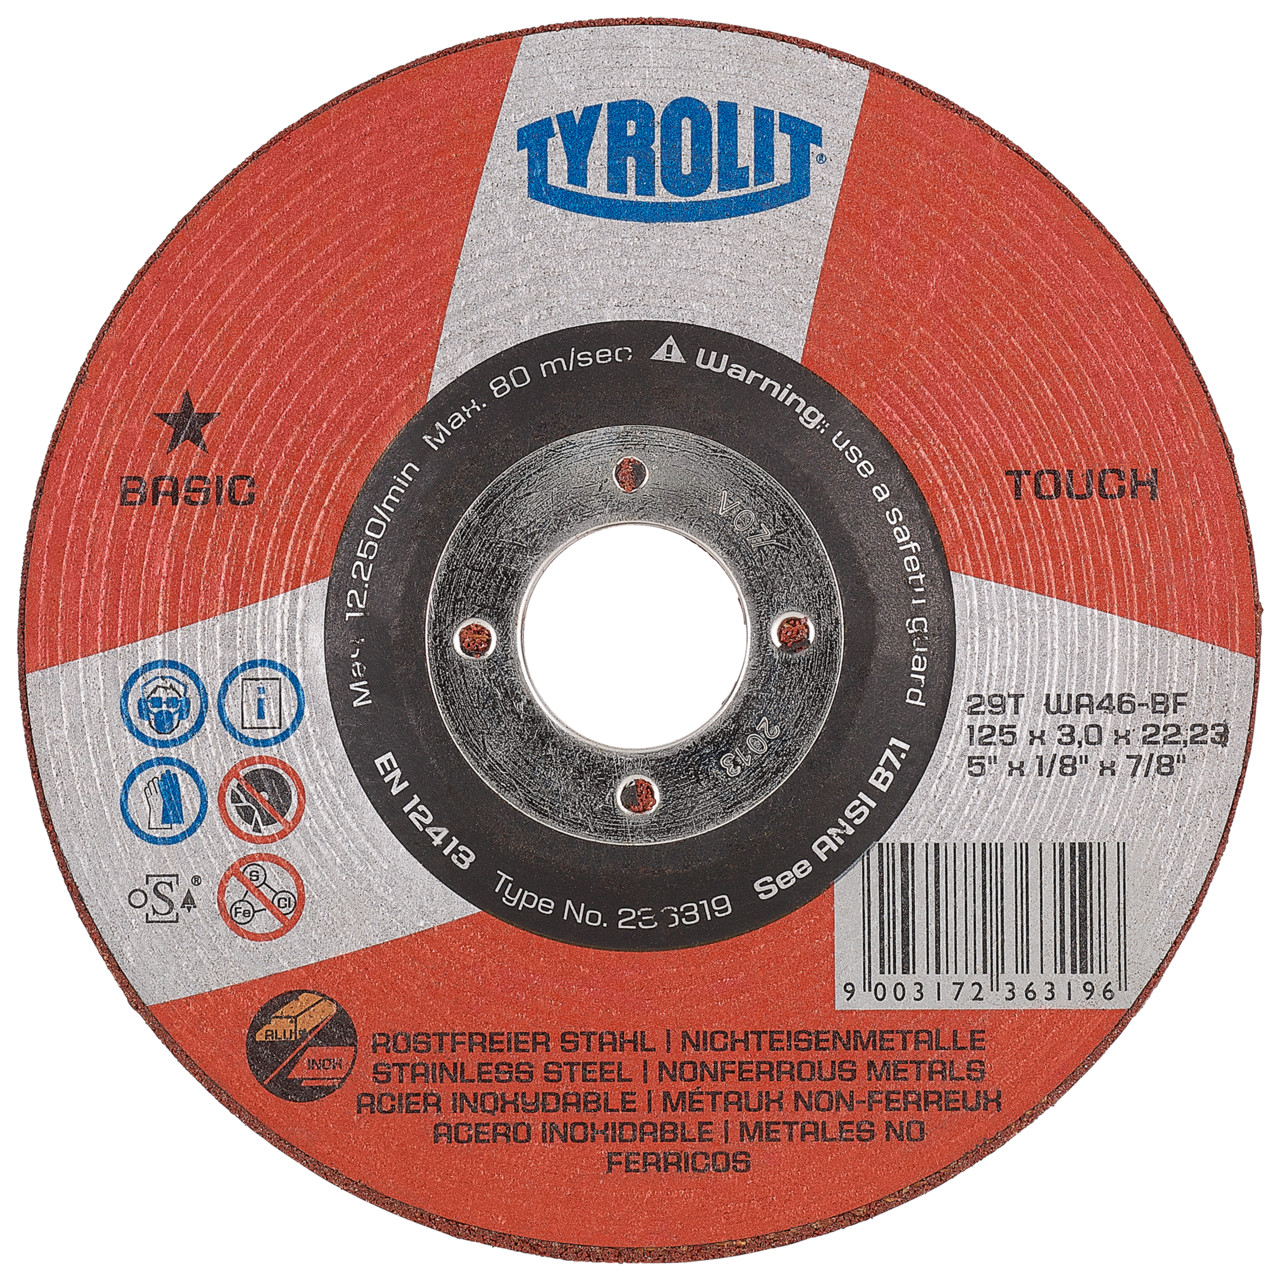 Tyrolit Grinding disc DxH 178x22.23 TOUCH for stainless steel and non-ferrous metals, shape: 29T - offset version, Art. 236320